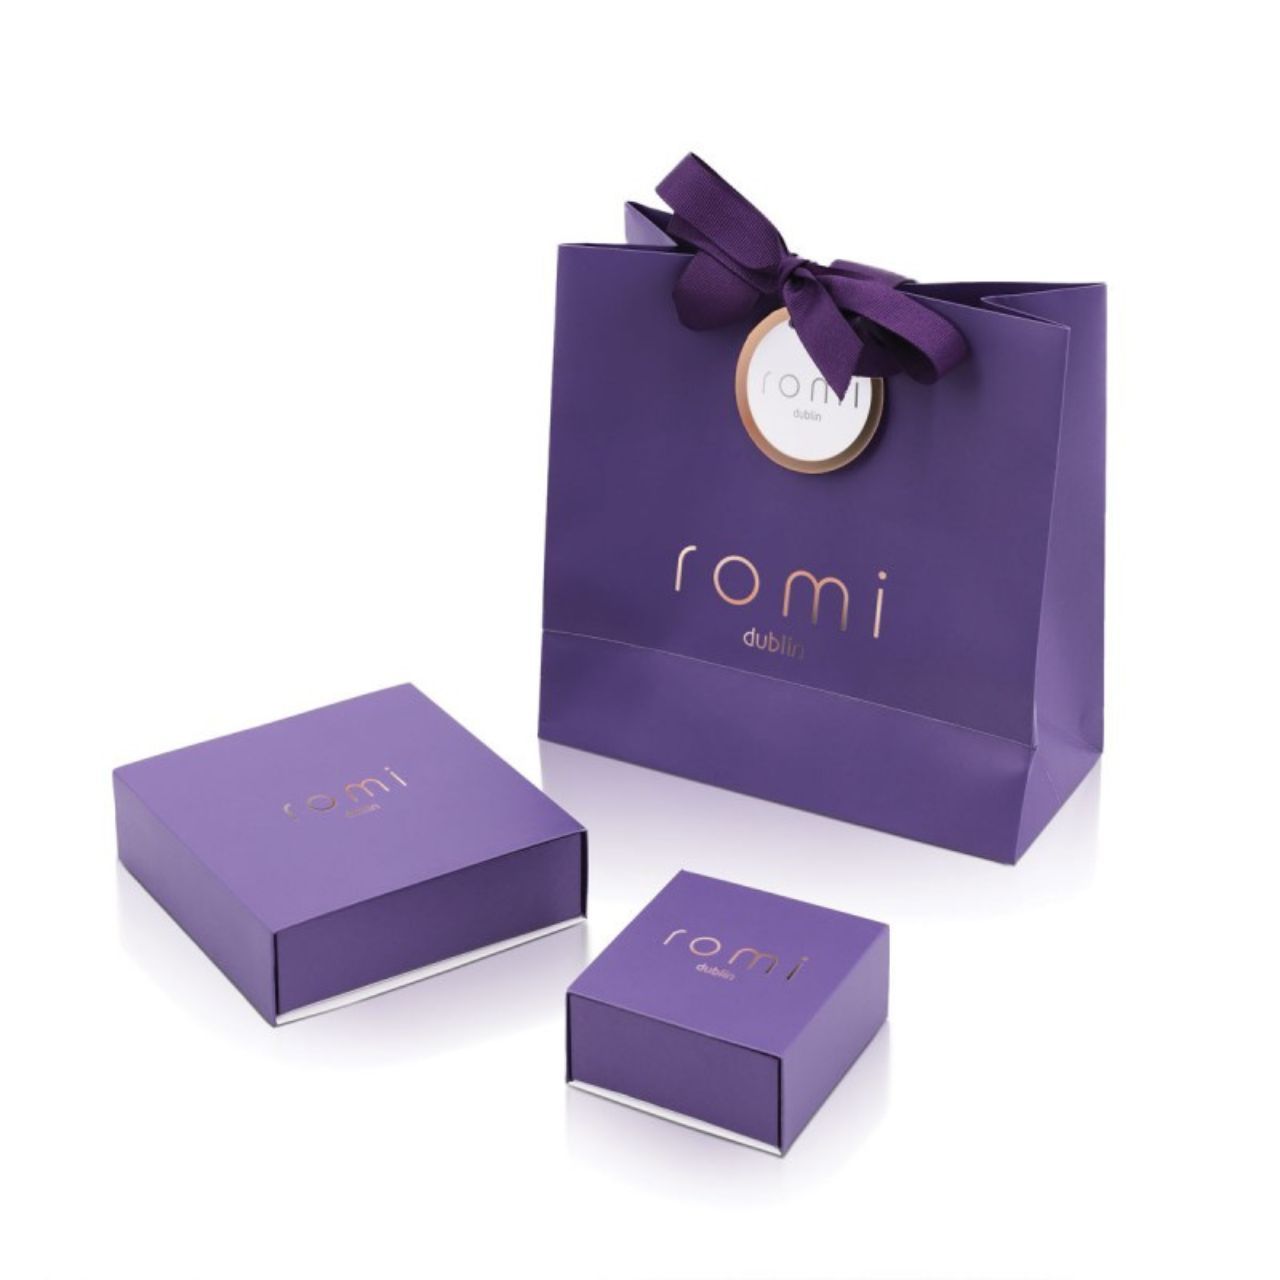 Romi Dublin Rose Gold Bead Necklace - Berry  Simple and understated this collection has a contemporary and sleek look that will allow you to accessorise with any outfit.